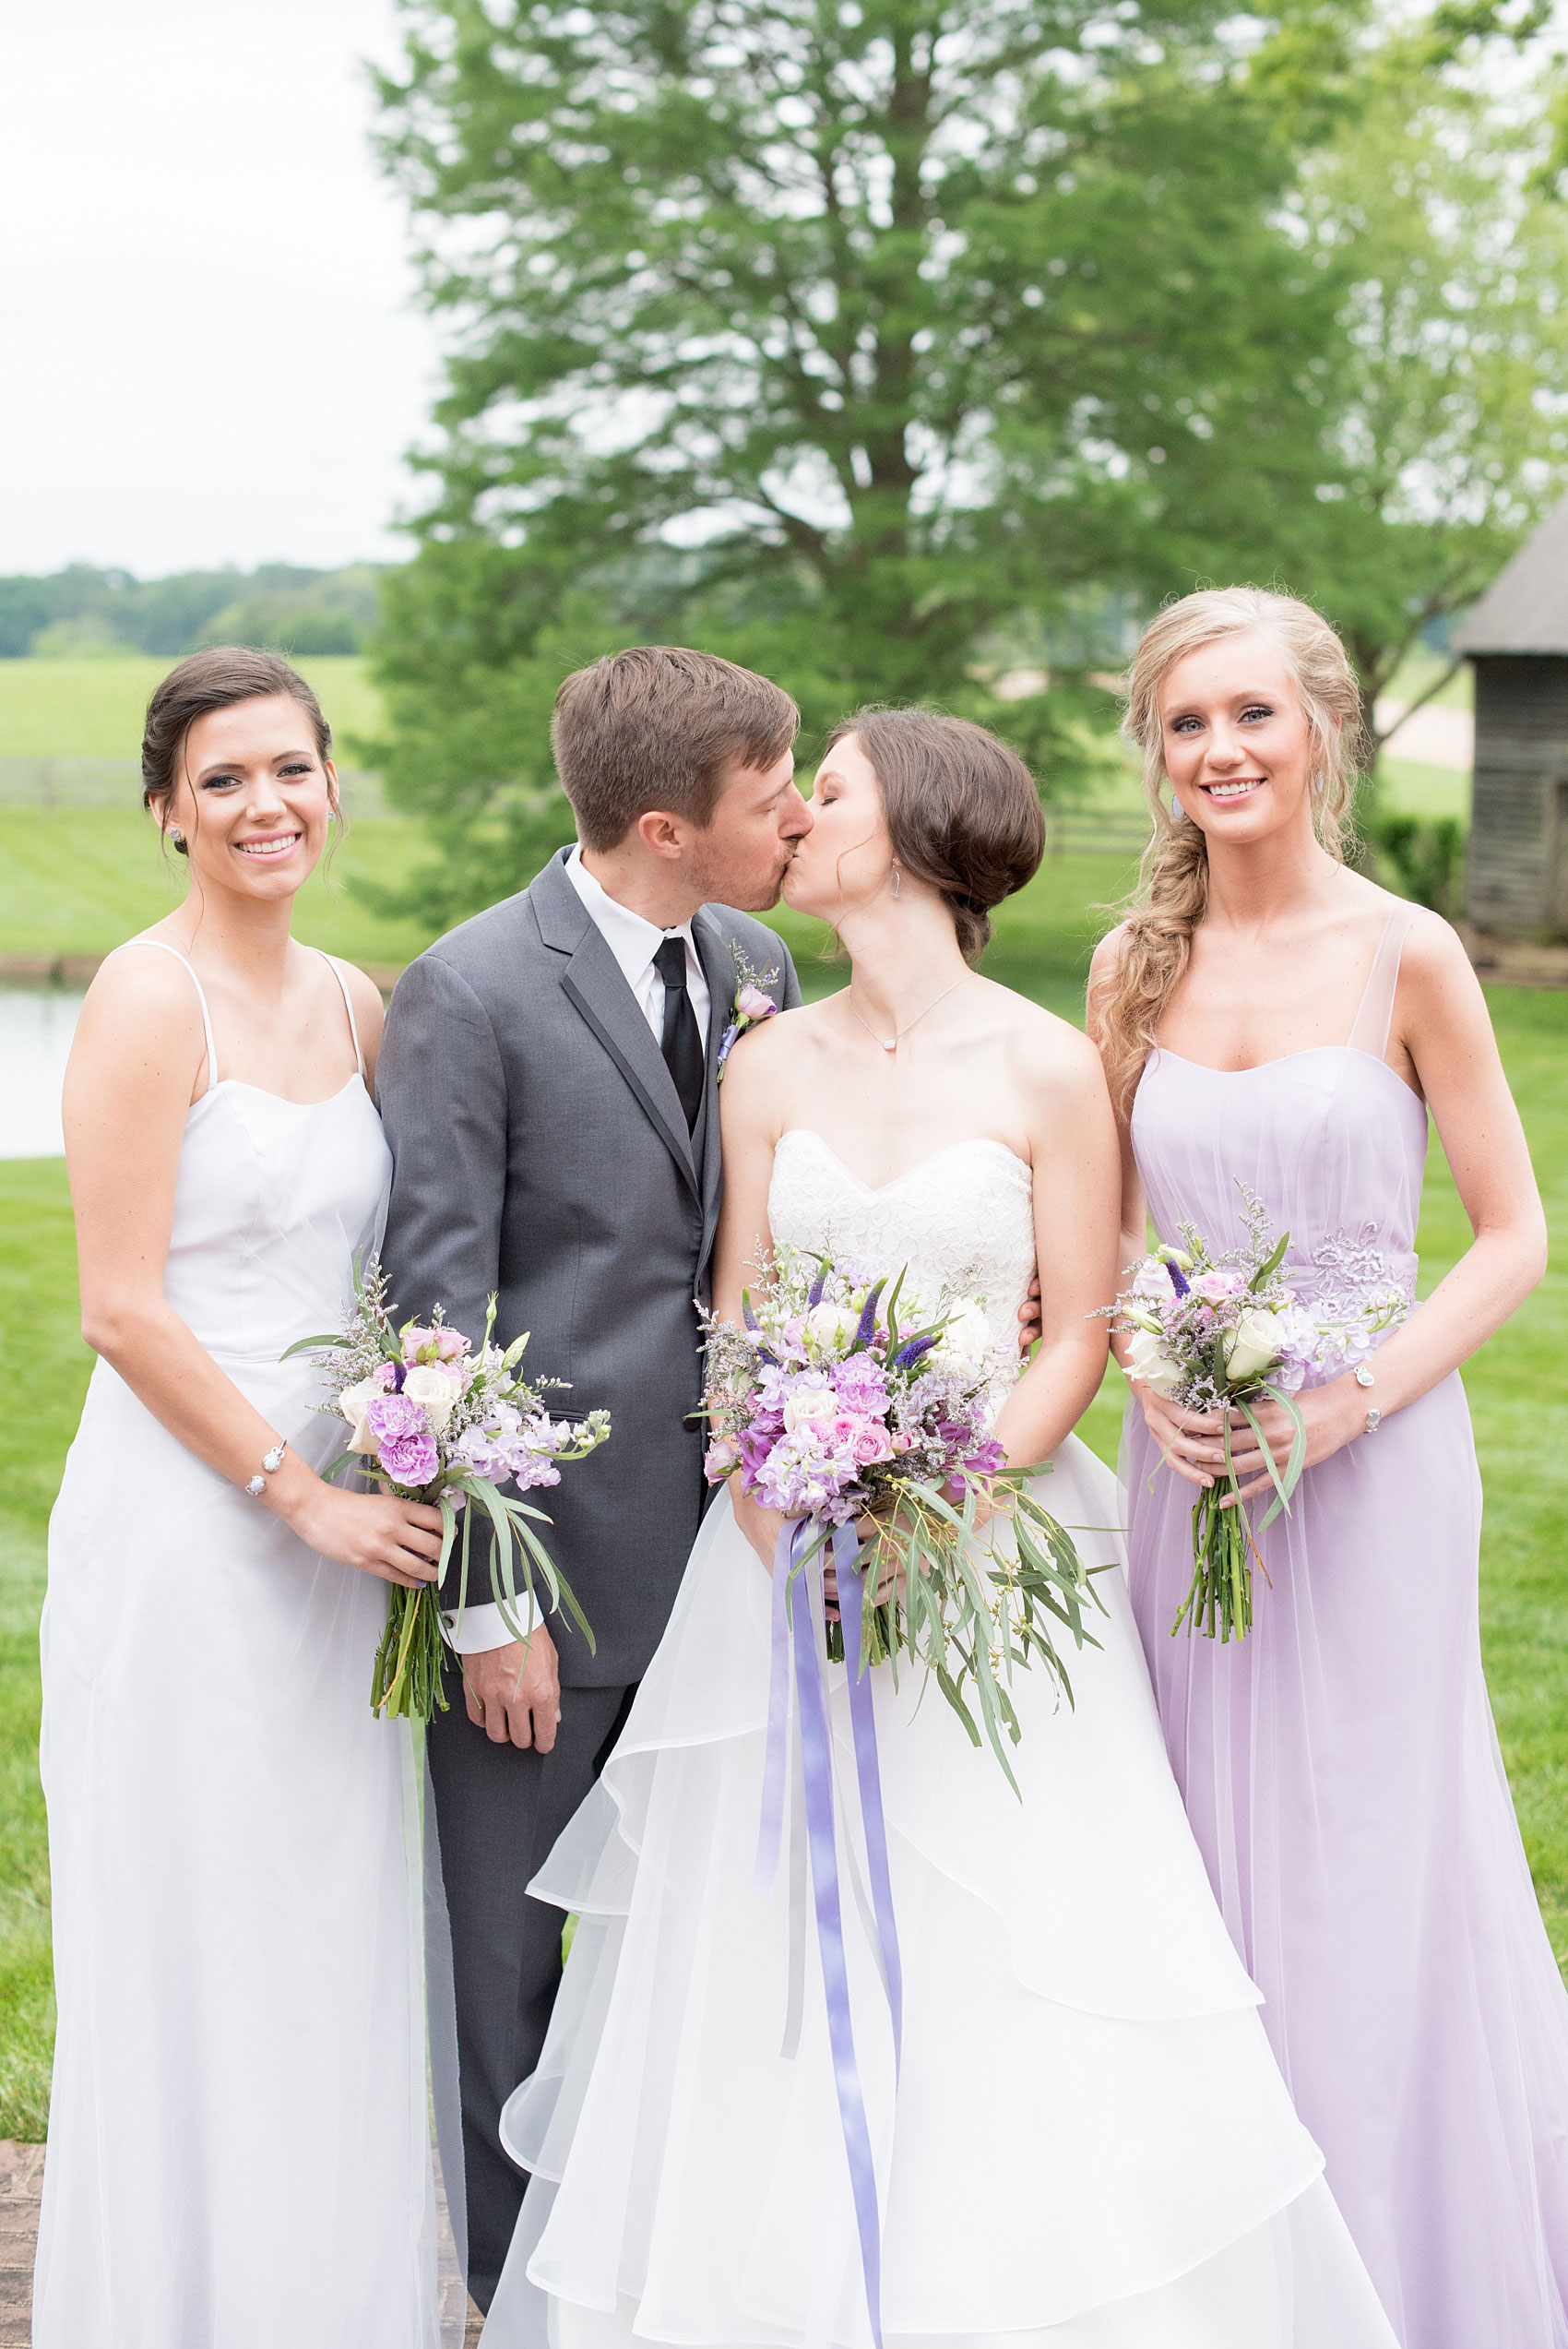 Mikkel Paige Photography images of a Rose Hill Plantation wedding. Photos of the wedding party in lavender, purple and silver tones.